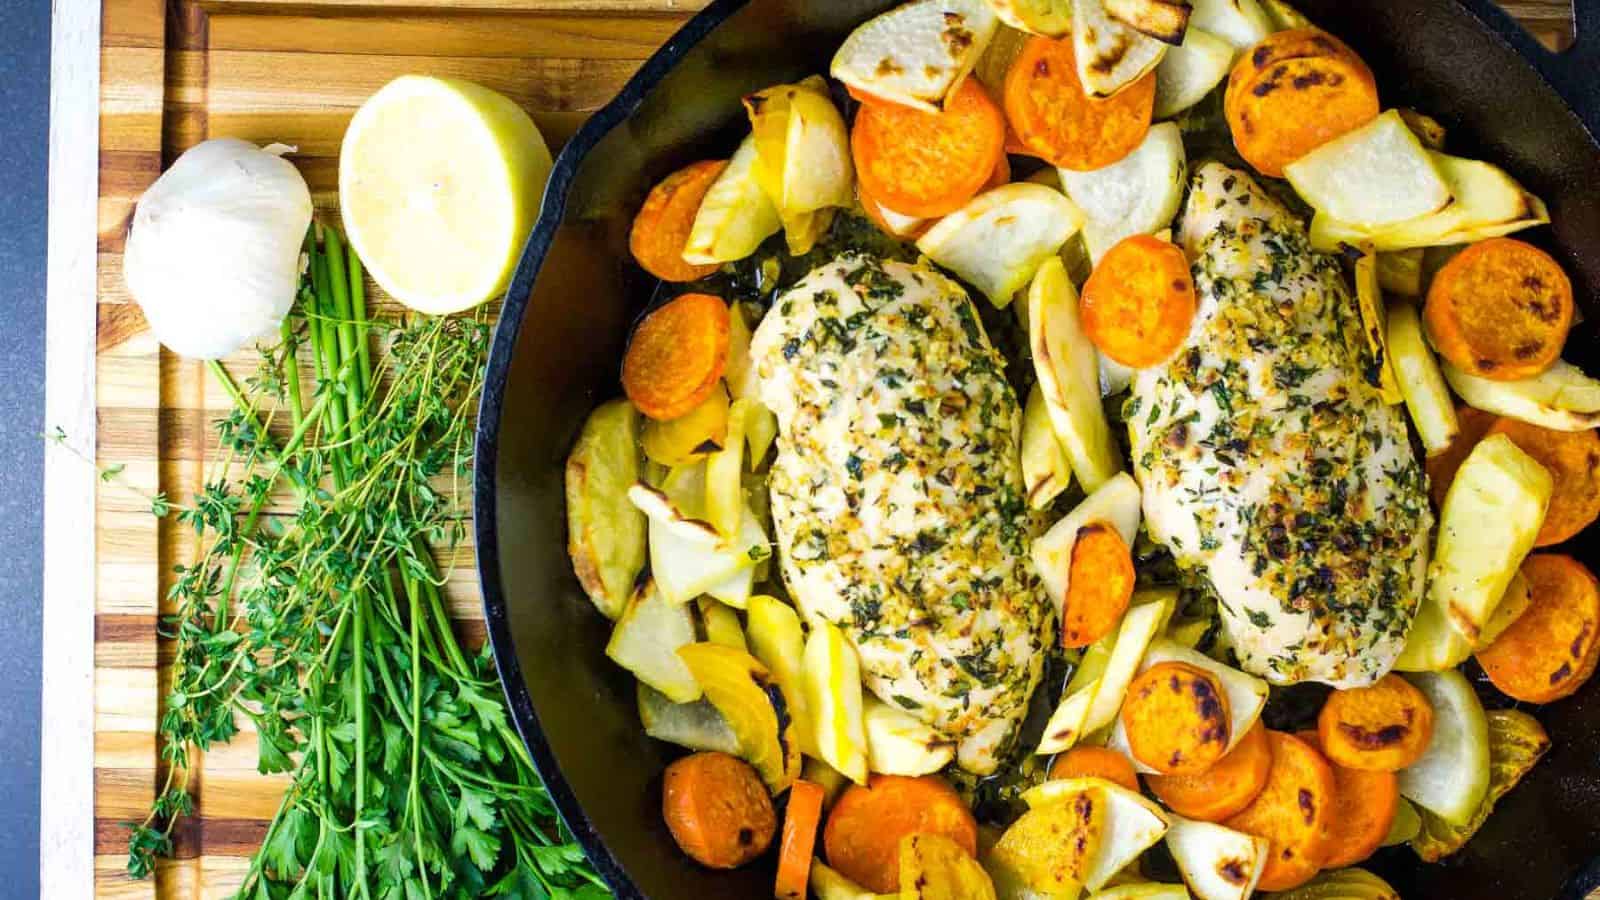 Roasted chicken and vegetables in a skillet on a cutting board.